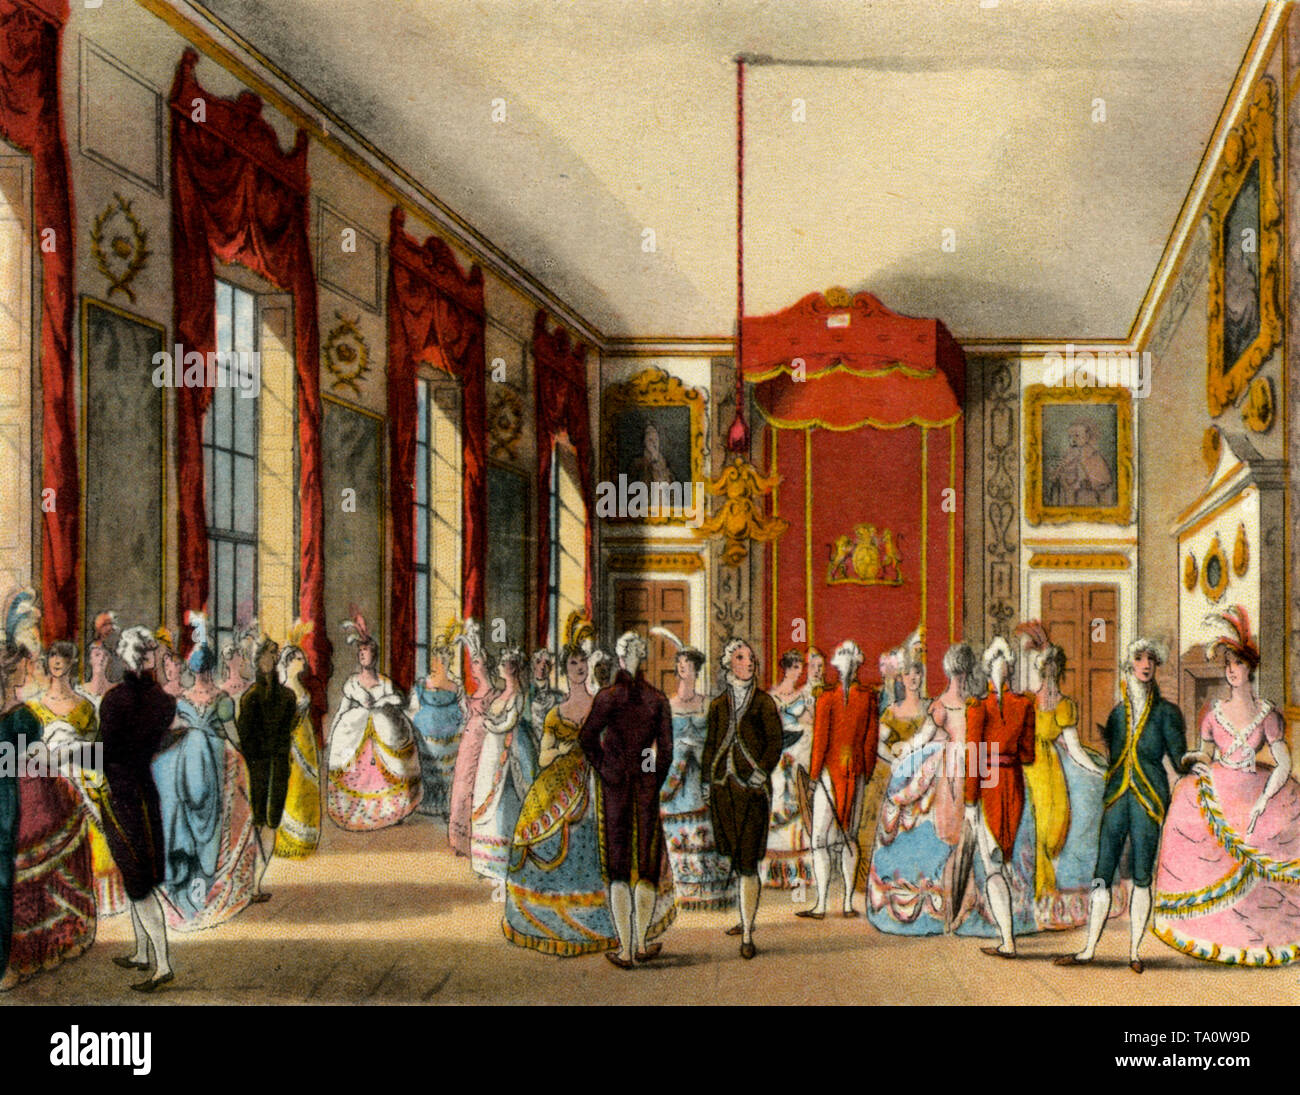 Drawing Room at St. James's Palace, c1808-1810. A print from 'The Microcosm of London', by William Henry Pyne (1770-1843). Illustrated by Thomas Rowlandson (1756-1827) and Auguste Charles Pugin (1762-1832). Commissioned by King Henry VIII St James's Palace is still the official residence of the British Sovereign. Stock Photo